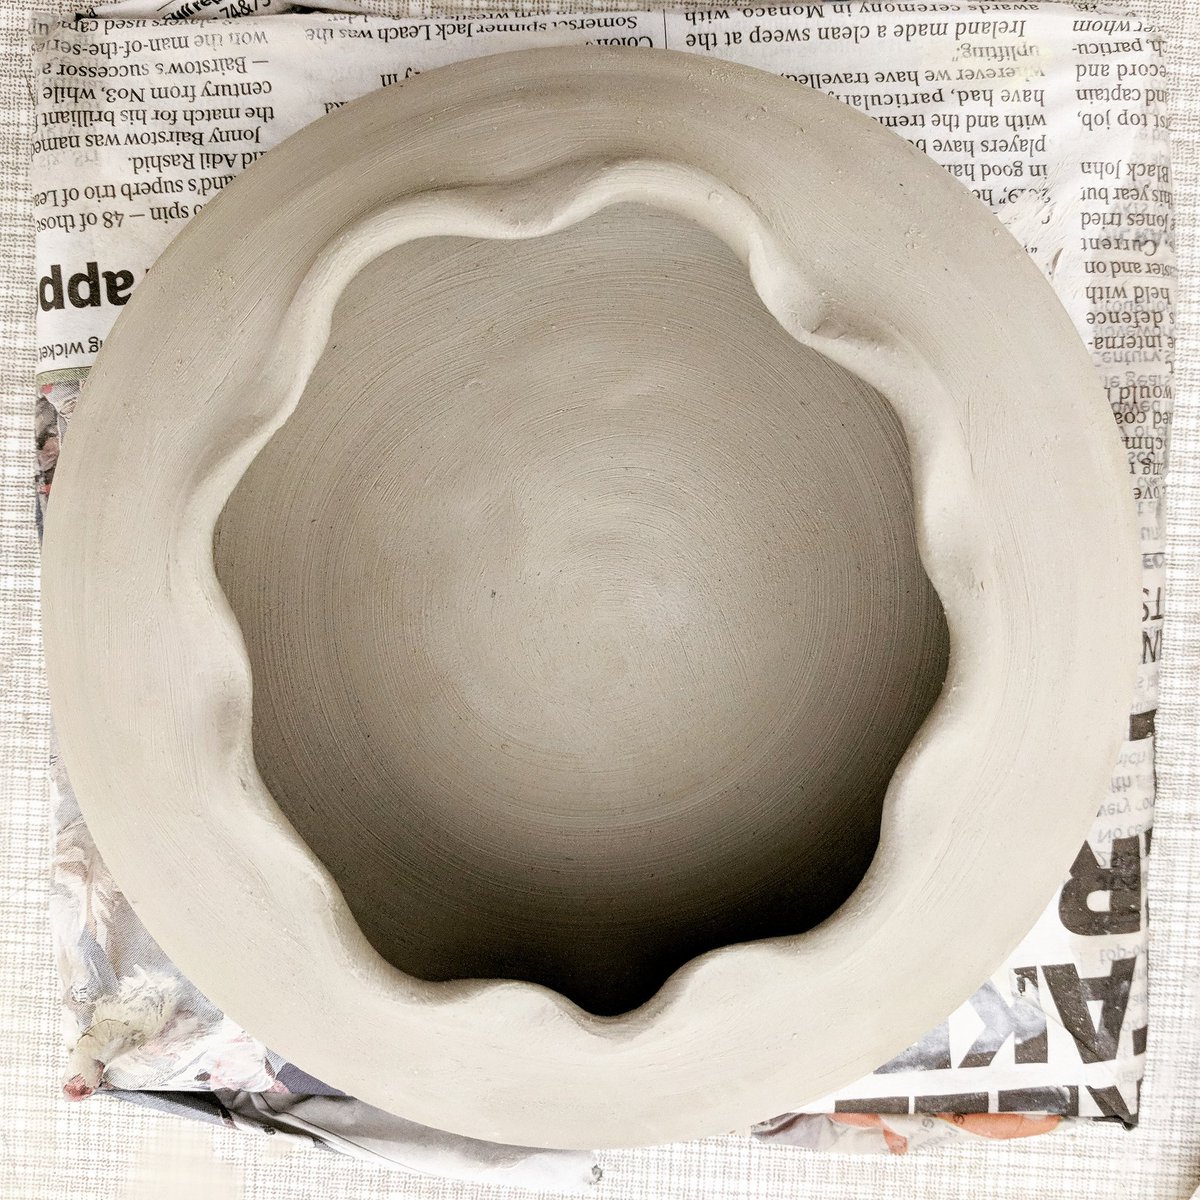 A subtly manipulated form thrown on the wheel with a curved bottom. #ceramics #pottery #handmade #thrownforms #sculpturalforms #studiopractice #studiowork #patterns @edoyledesigns